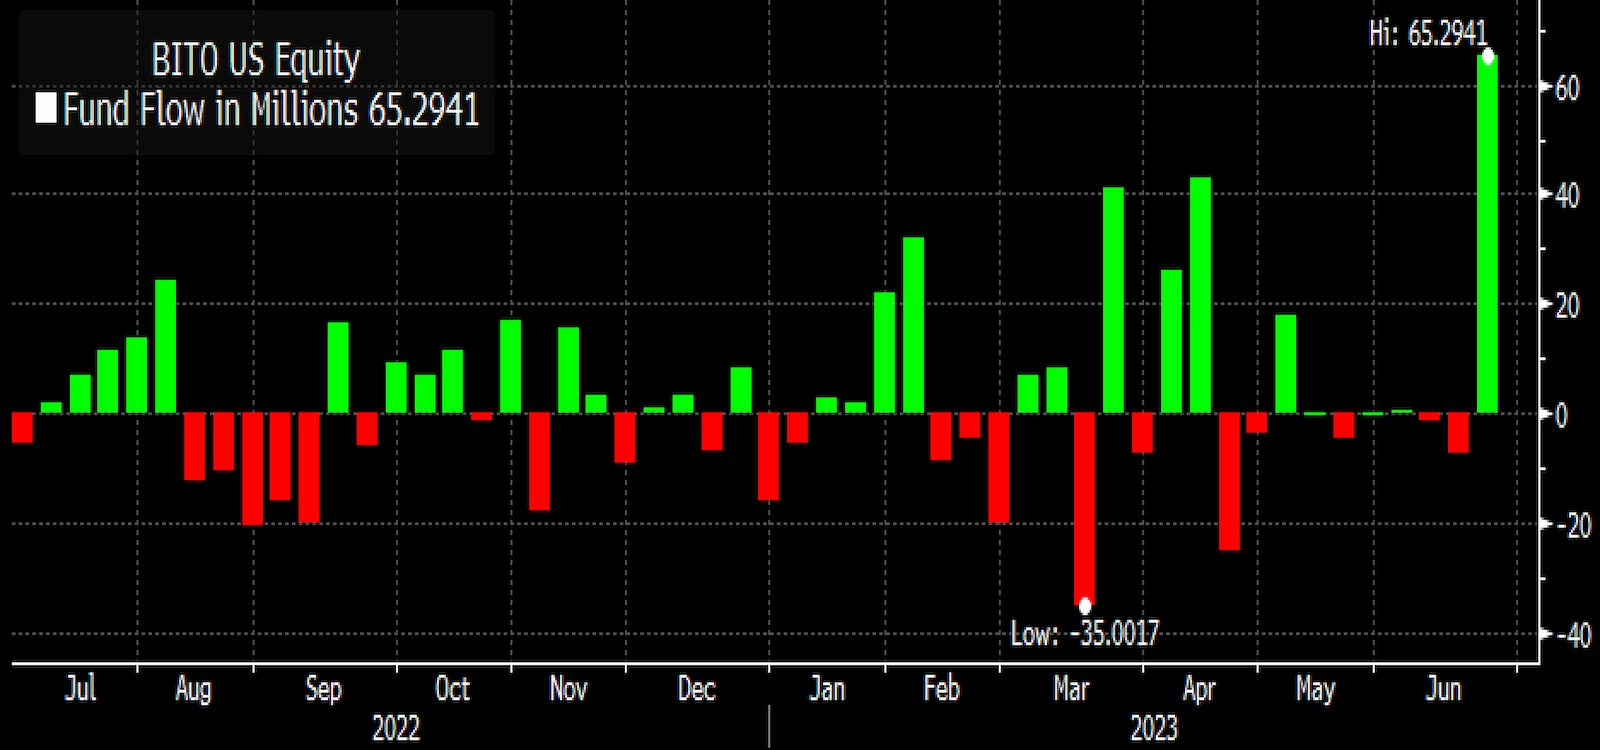 Proshares Bitcoin Futures ETF saw its highest inflows in over a year.